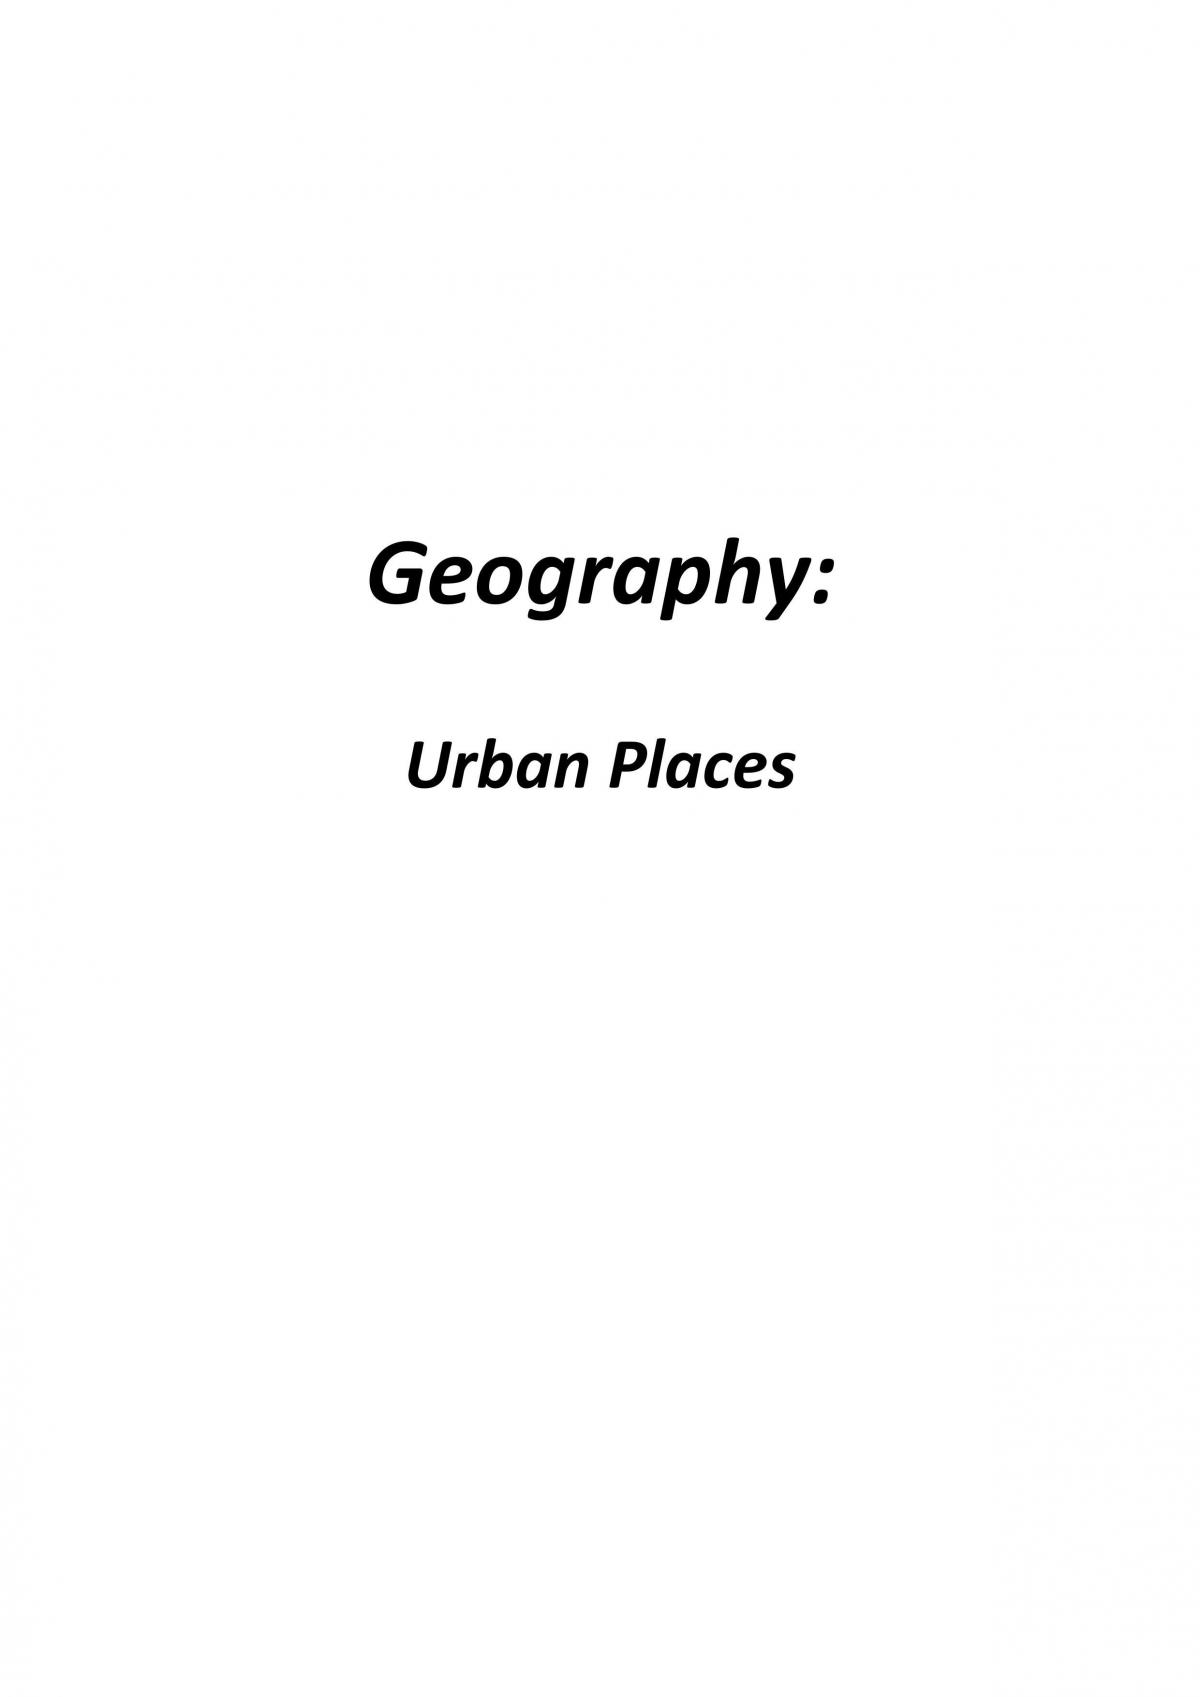 HSC Geography 8.3.2 - Urban Places Complete Topic Study Notes - Page 1